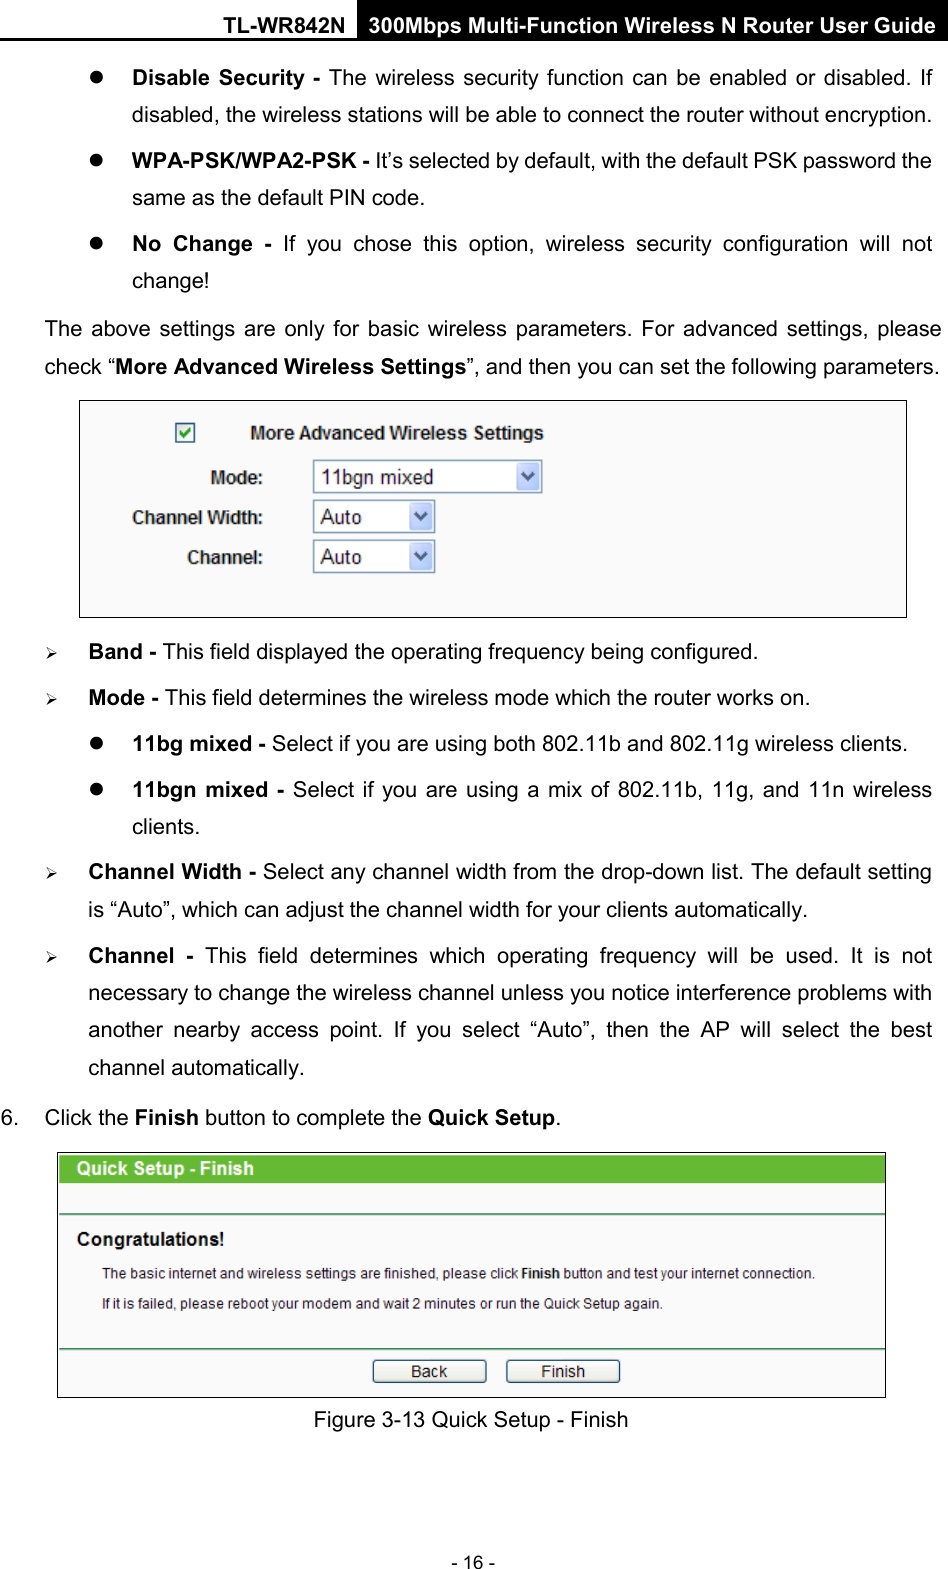 TL-WR842N 300Mbps Multi-Function Wireless N Router User Guide  - 16 -  Disable Security - The wireless security function can be enabled or disabled. If disabled, the wireless stations will be able to connect the router without encryption.    WPA-PSK/WPA2-PSK - It’s selected by default, with the default PSK password the same as the default PIN code.  No Change  - If you chose this option, wireless security configuration will not change! The above settings are only for basic wireless parameters.  For advanced settings, please check “More Advanced Wireless Settings”, and then you can set the following parameters.   Band - This field displayed the operating frequency being configured.  Mode - This field determines the wireless mode which the router works on.  11bg mixed - Select if you are using both 802.11b and 802.11g wireless clients.  11bgn mixed - Select if you are using a mix of 802.11b, 11g, and 11n wireless clients.  Channel Width - Select any channel width from the drop-down list. The default setting is “Auto”, which can adjust the channel width for your clients automatically.  Channel  - This field determines which operating frequency will be used. It is not necessary to change the wireless channel unless you notice interference problems with another nearby access point. If you select “Auto”, then the AP will select the best channel automatically. 6. Click the Finish button to complete the Quick Setup.    Figure 3-13 Quick Setup - Finish 